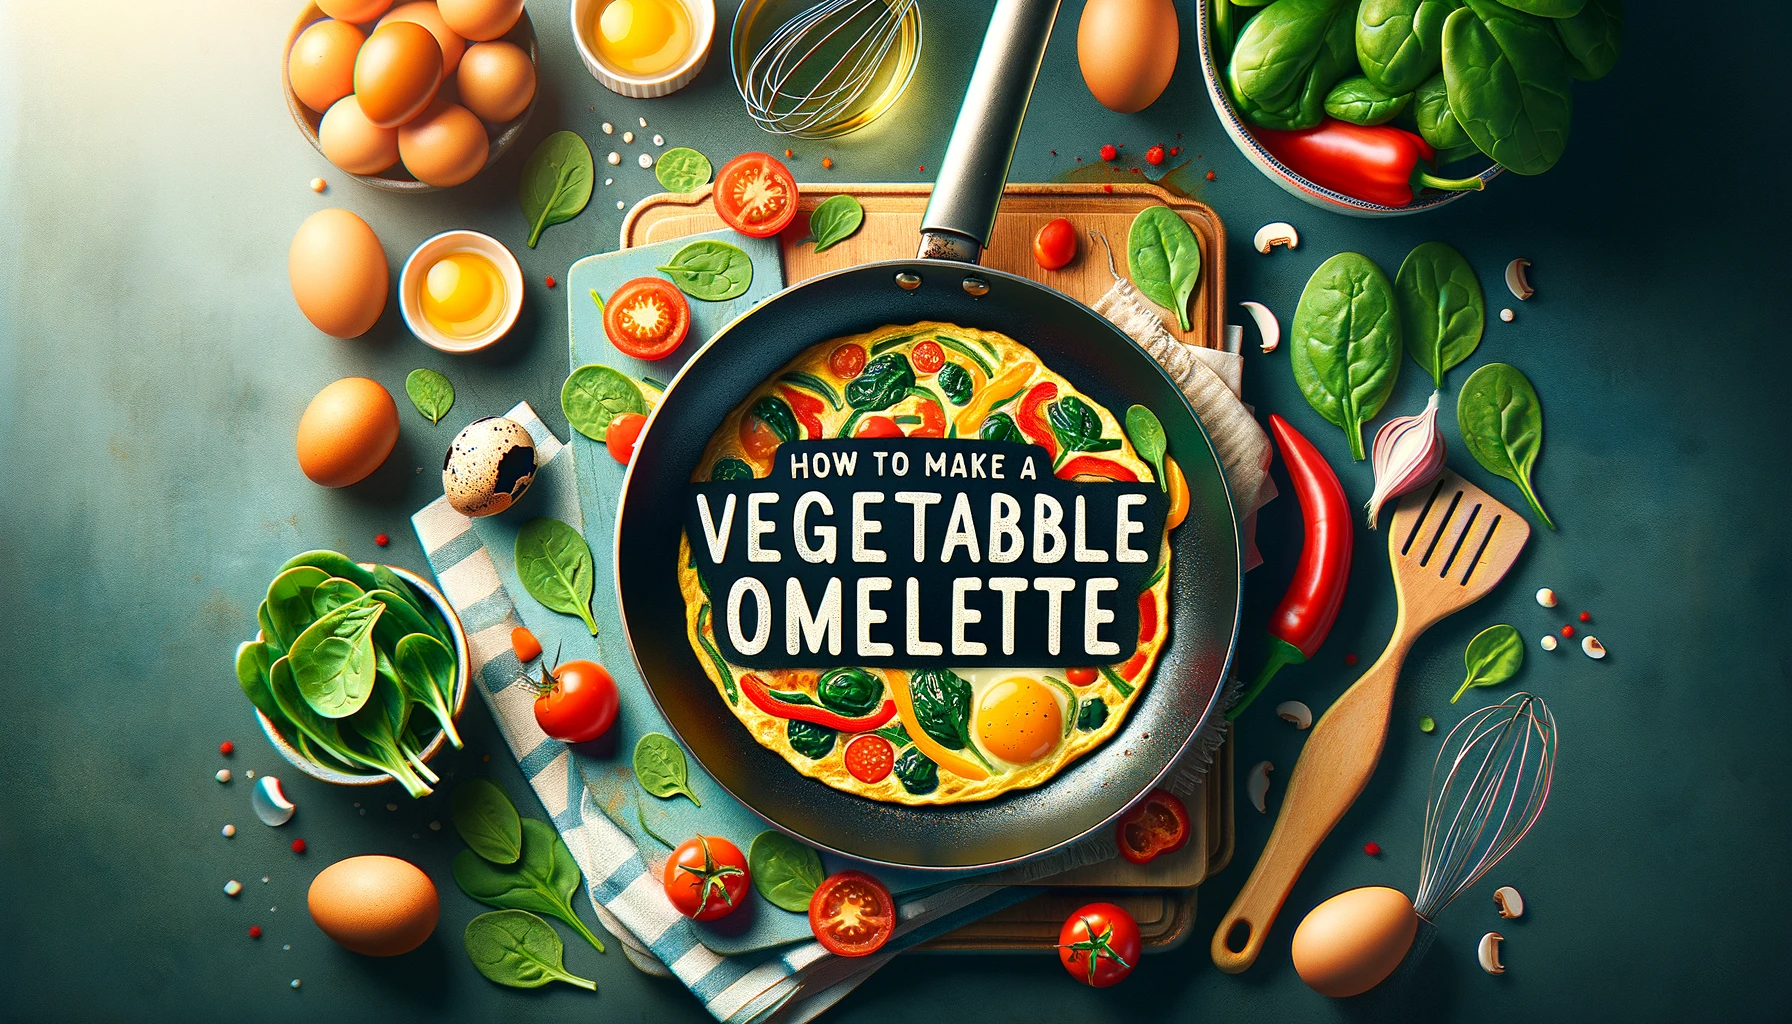 How To Make A Vegetable Omelette